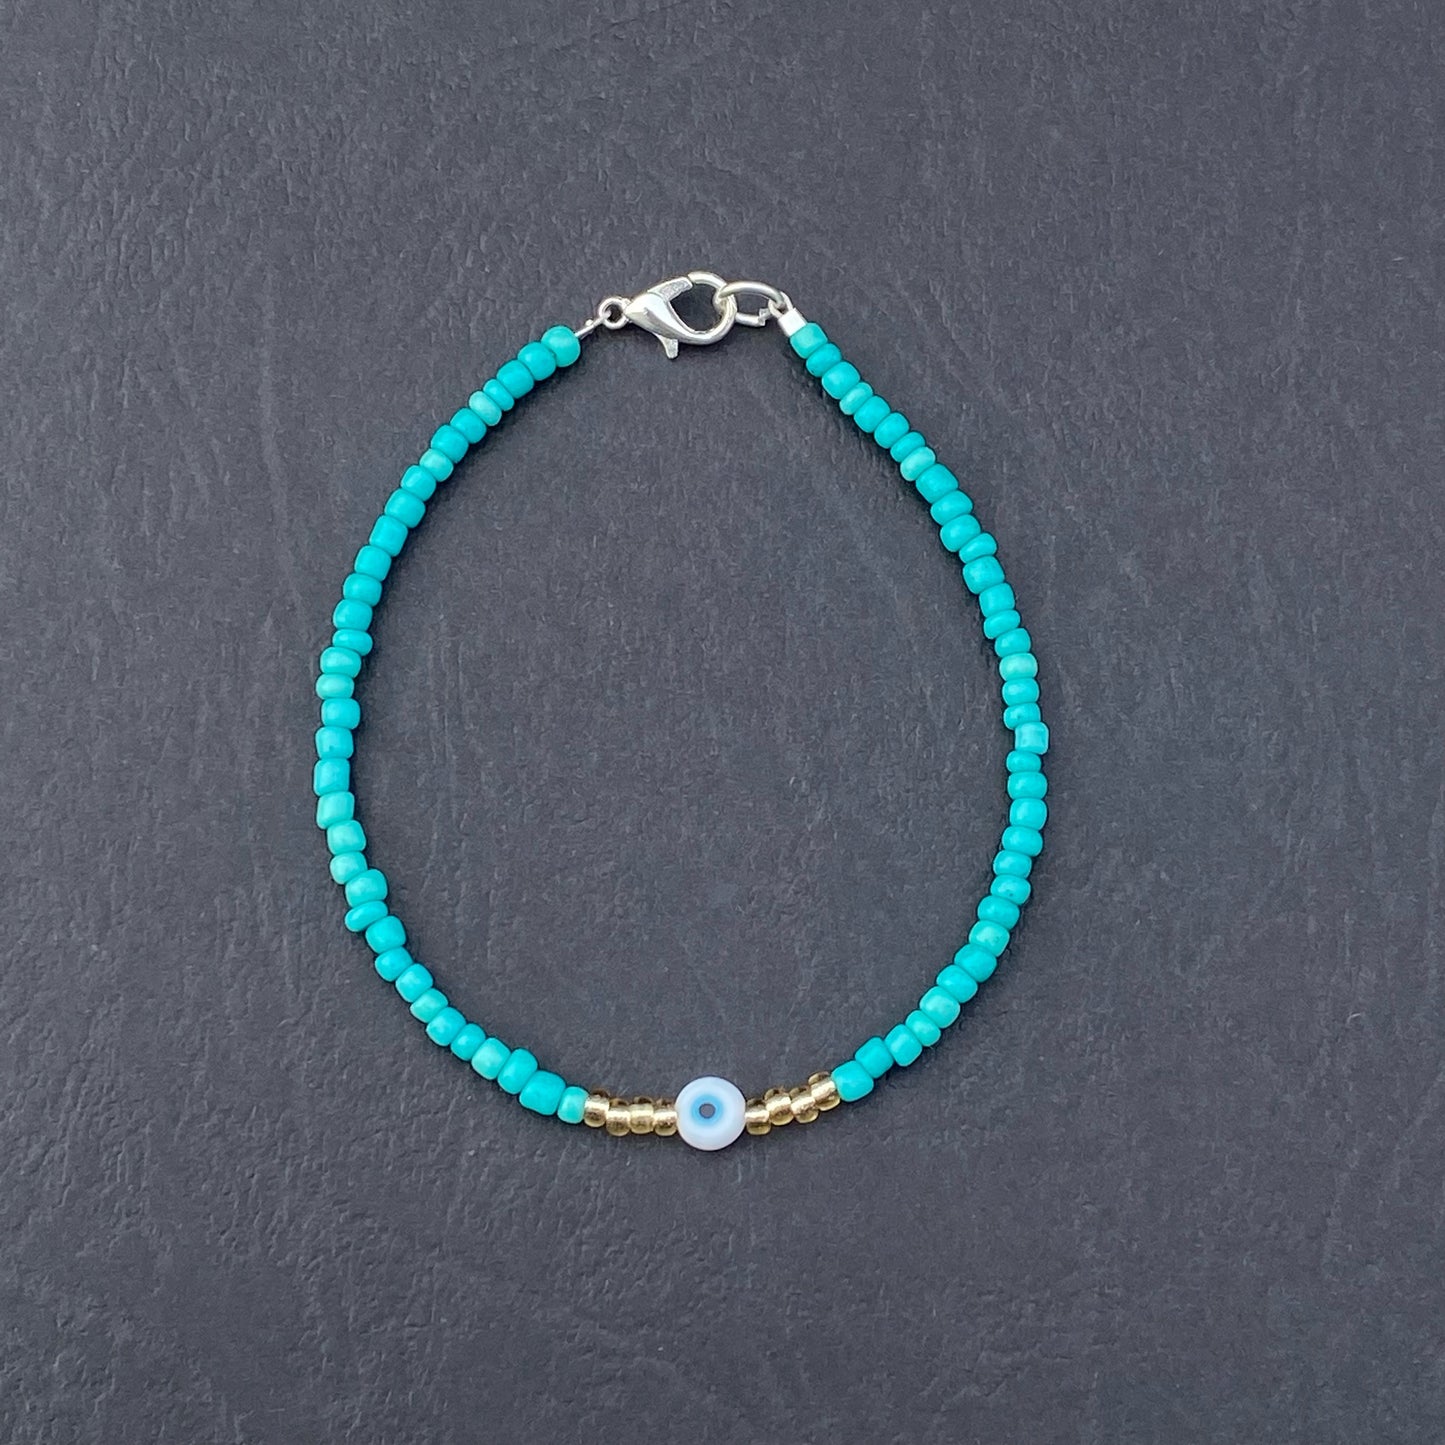 Turquoise Mati anklet